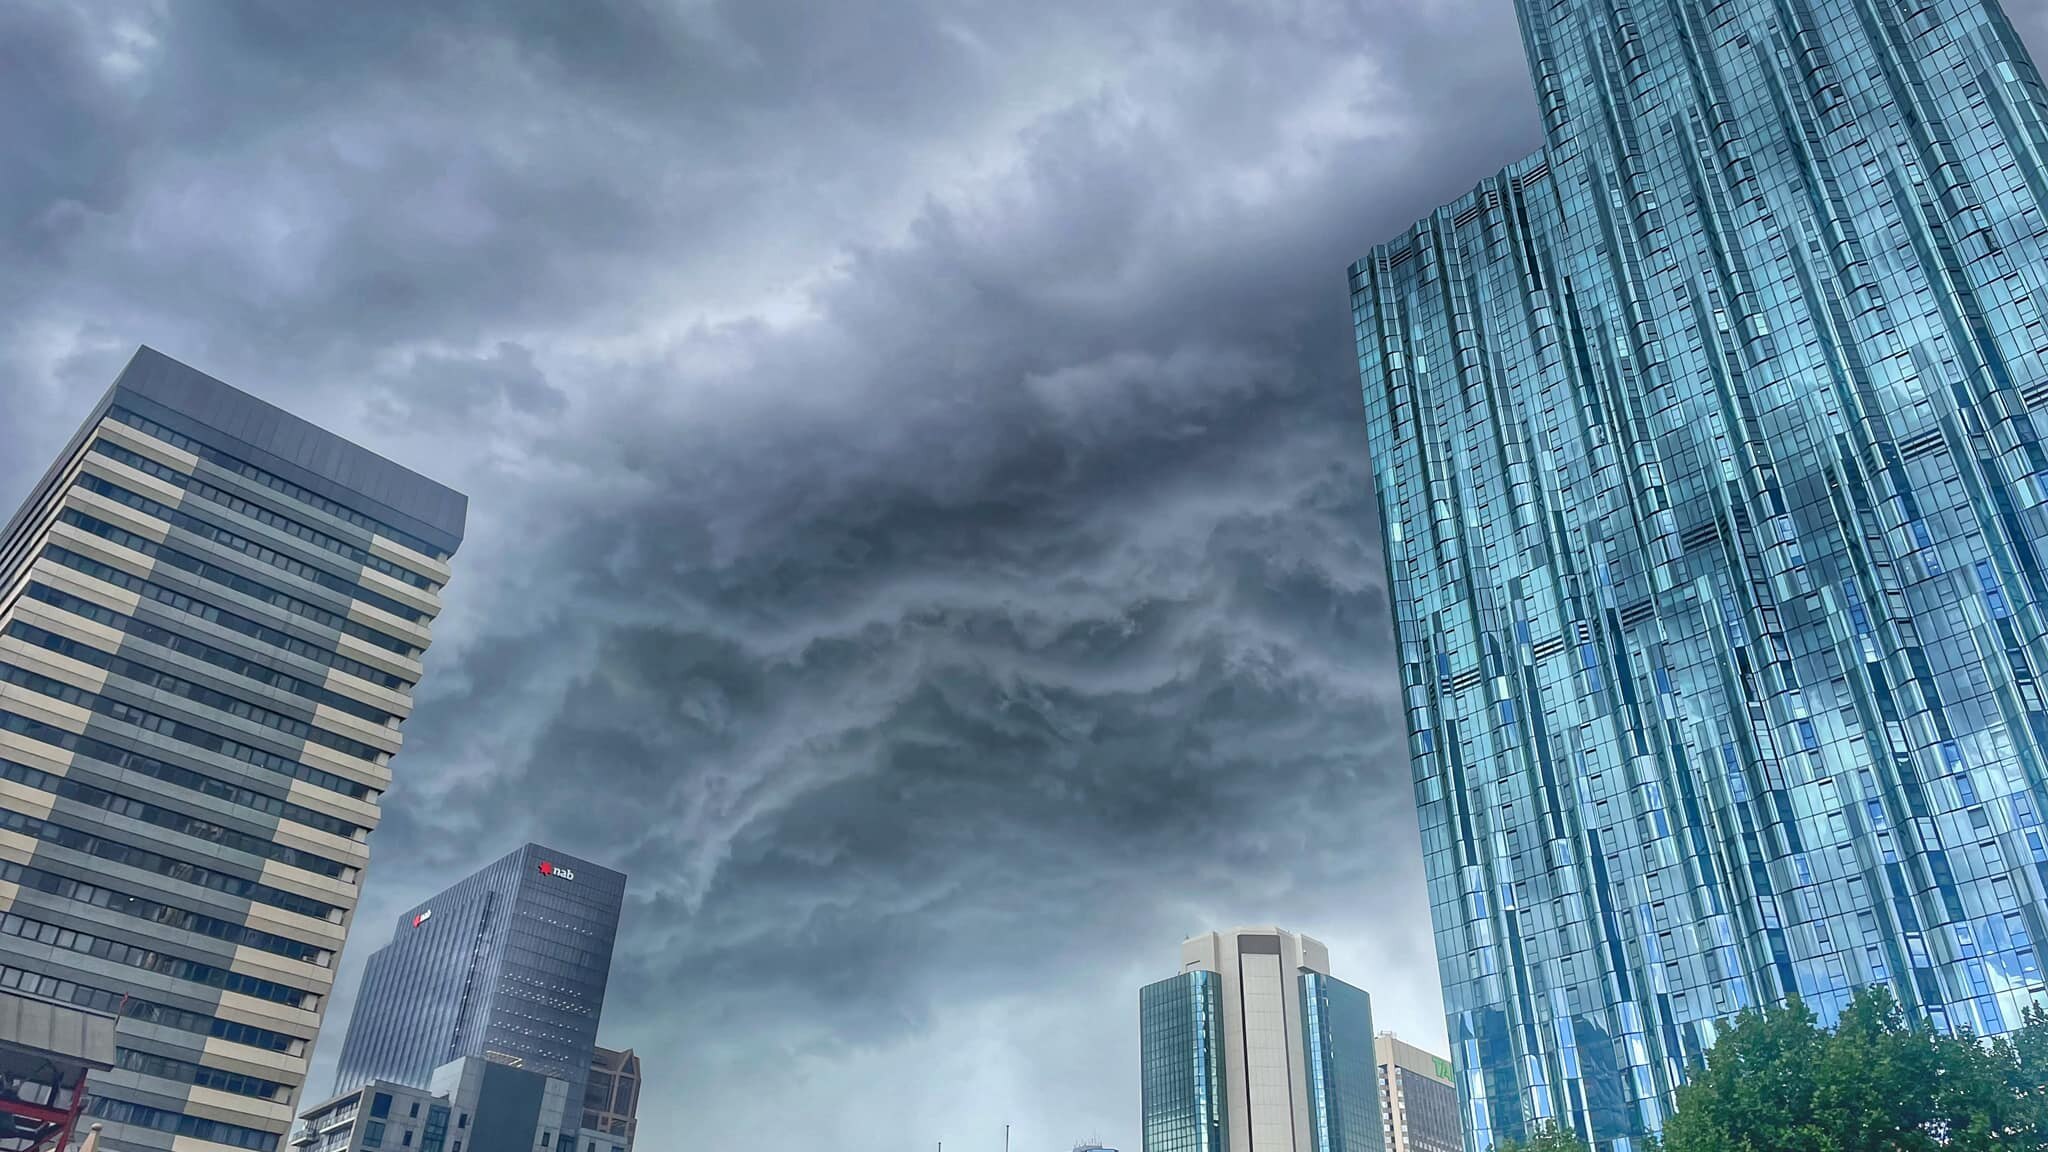 heatwaves, thunderstorms, and a possible cyclone — another week of extreme weather unfolding